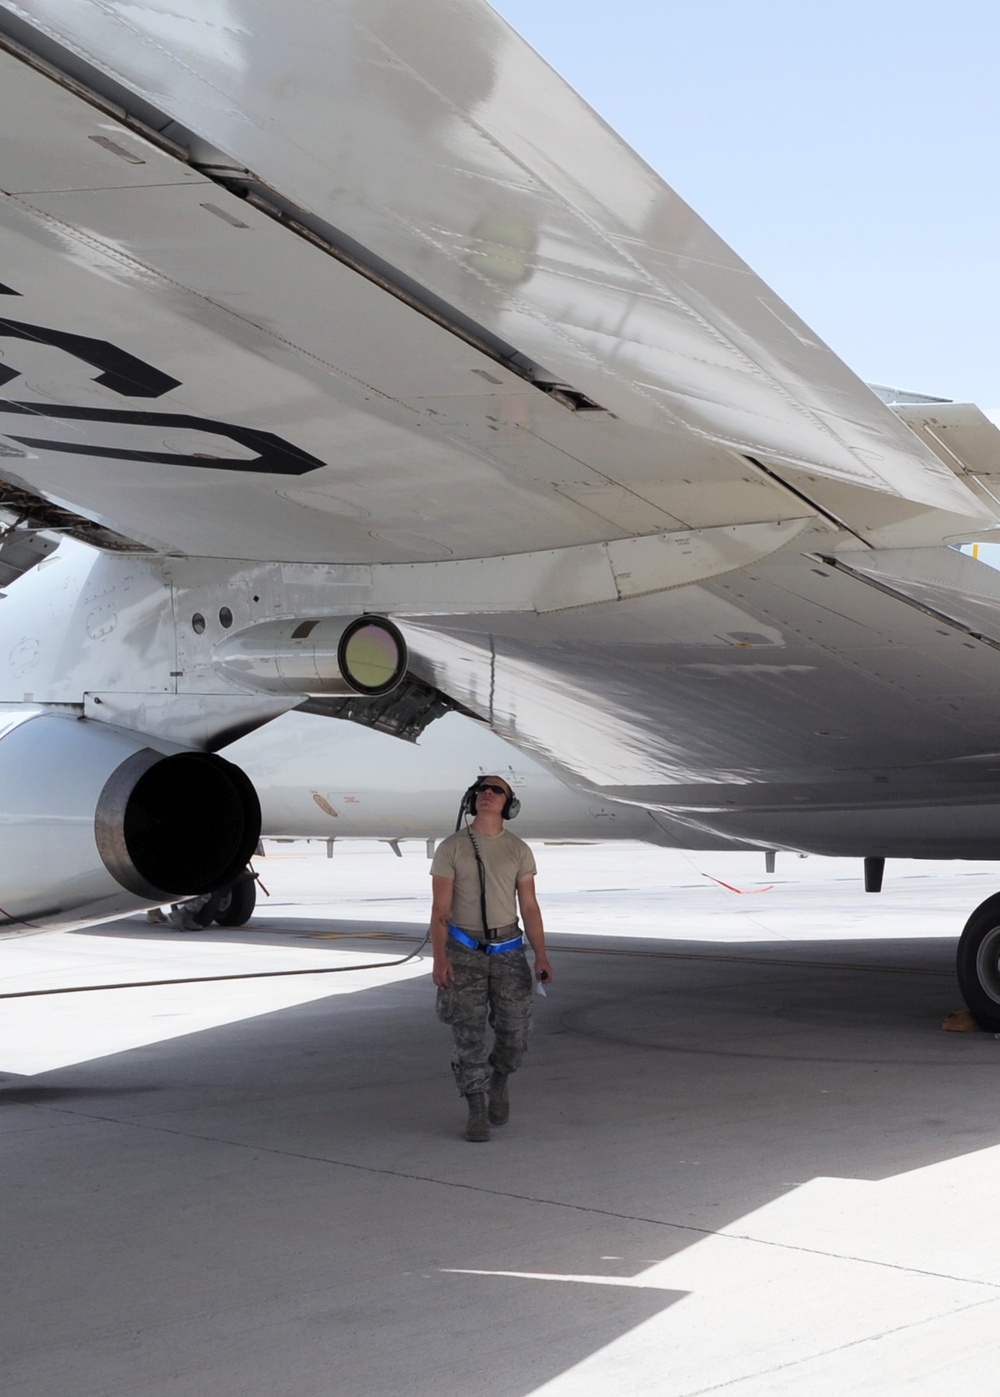 Tinker Senior Airman, Reno Native, Manages Maintenance Support As E-3 Sentry Crew Chief in Southwest Asia